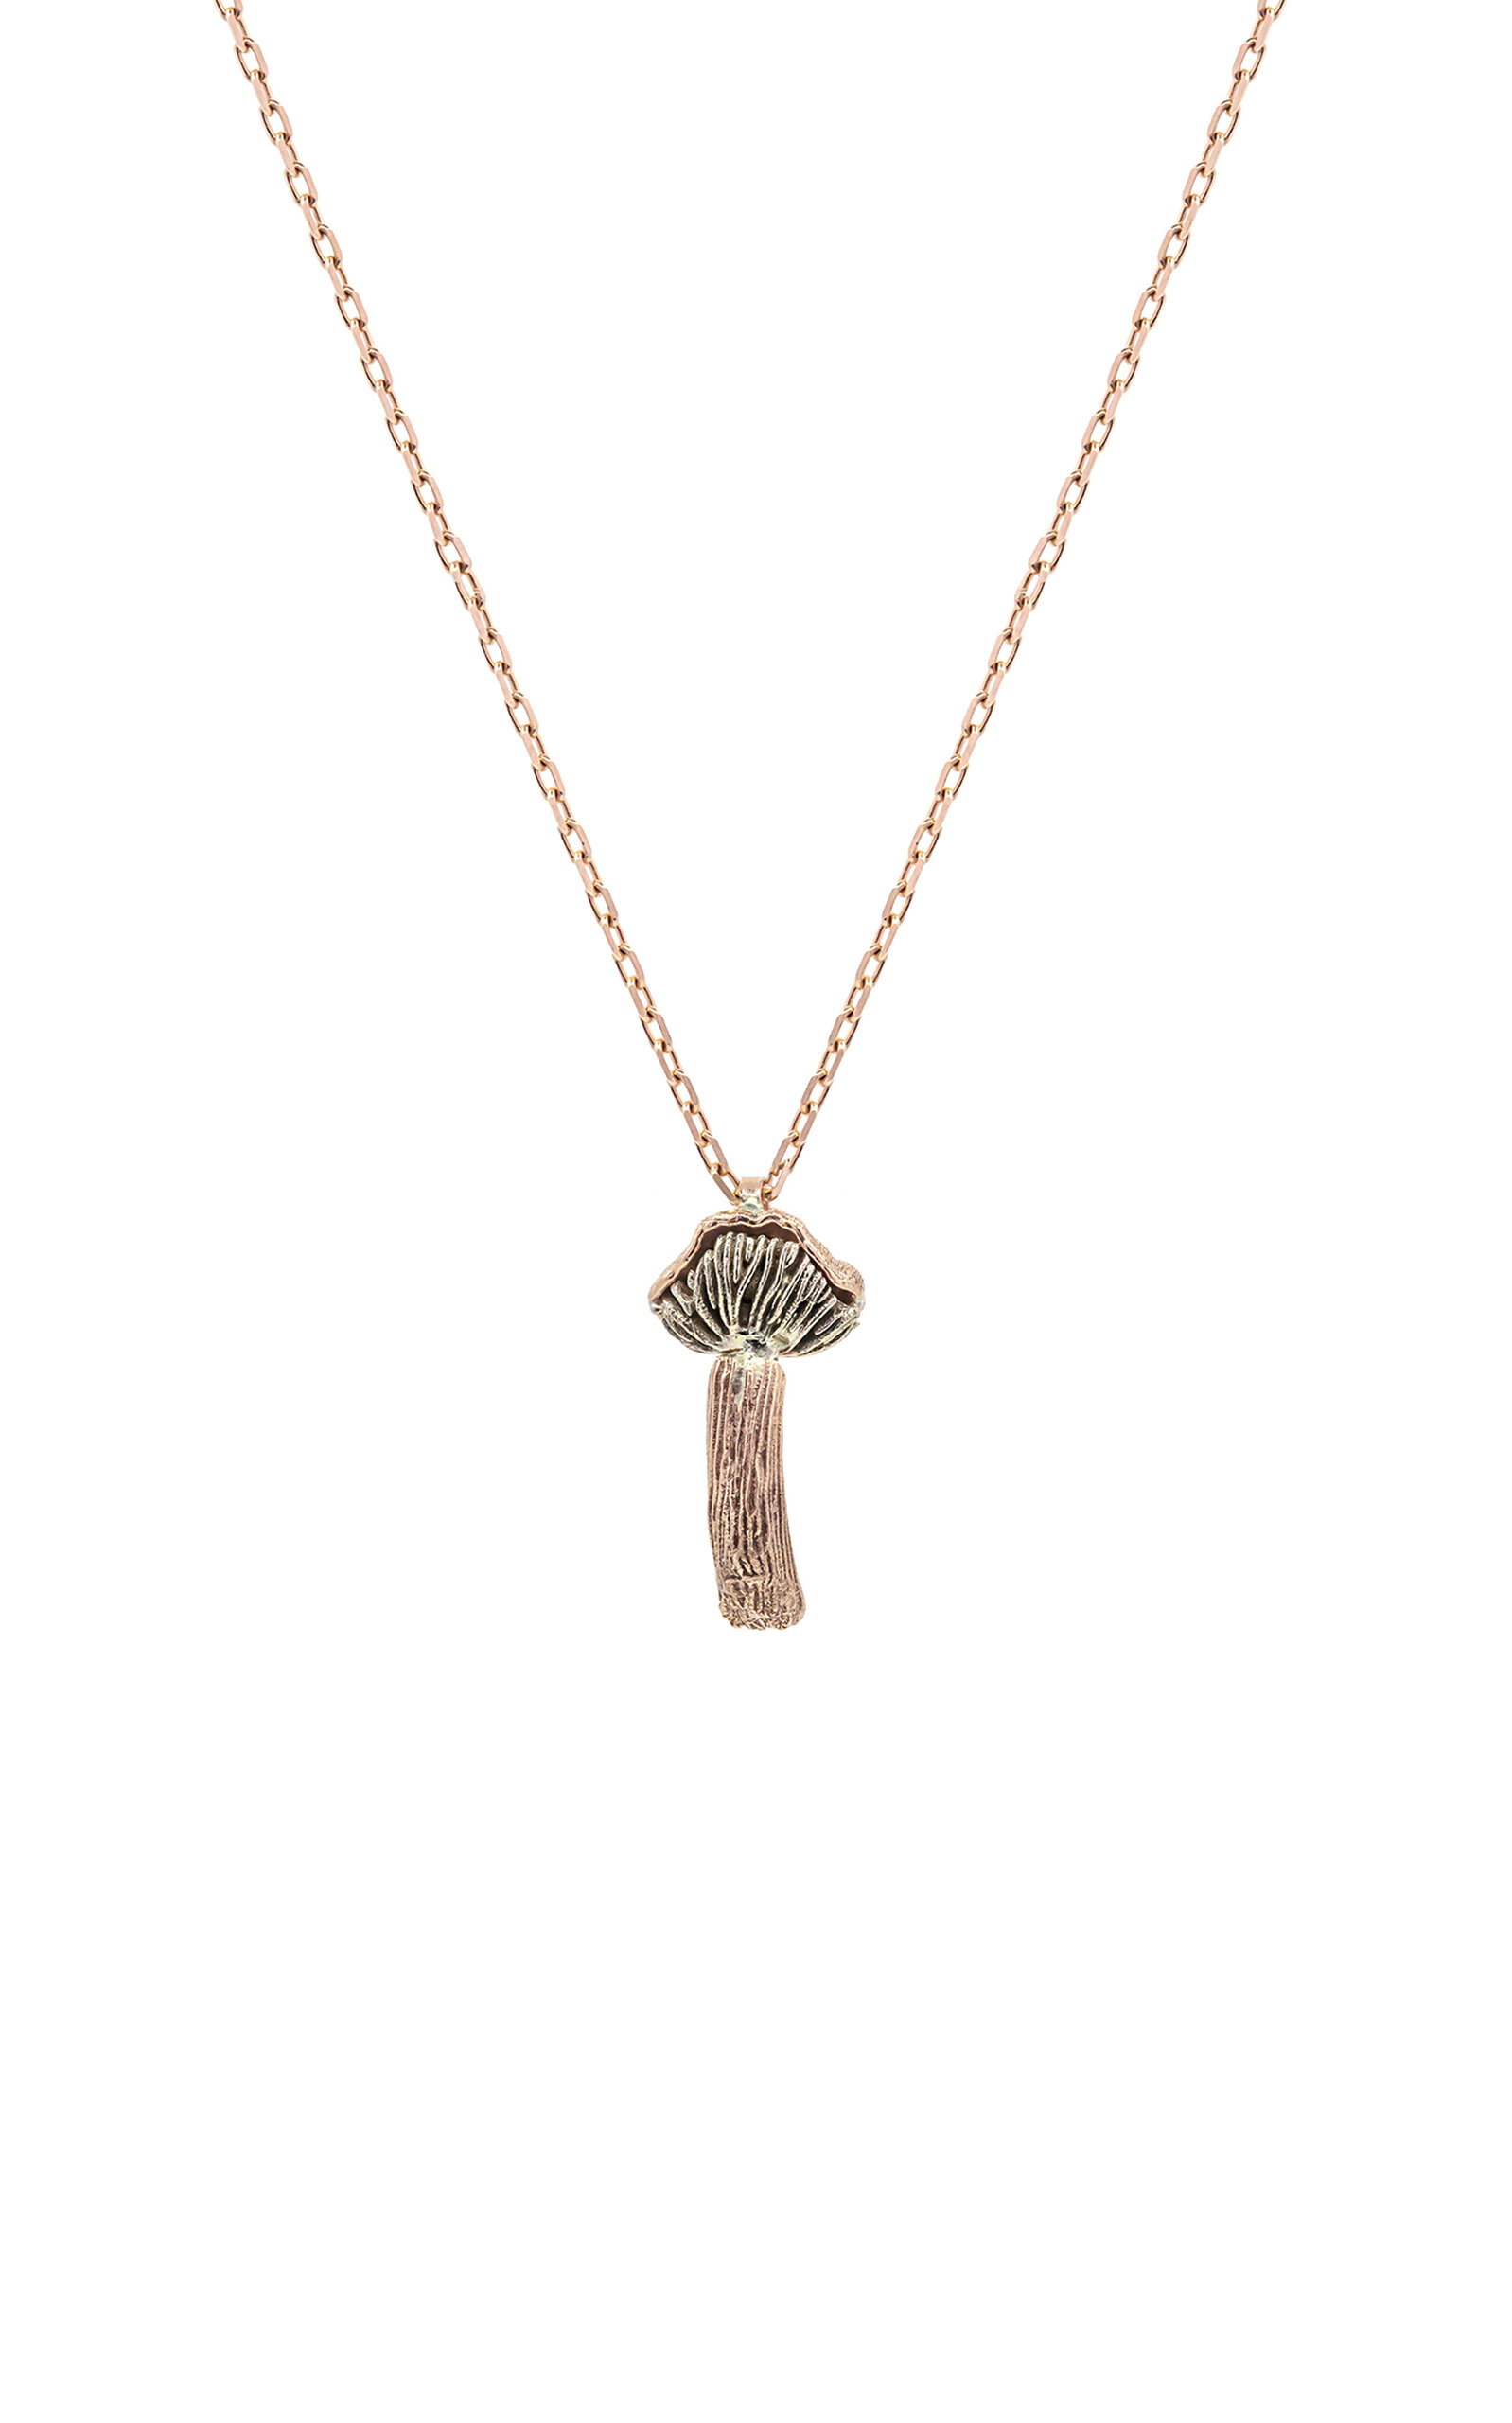 Fungi Laccaria 14K Rose and White Gold Necklace